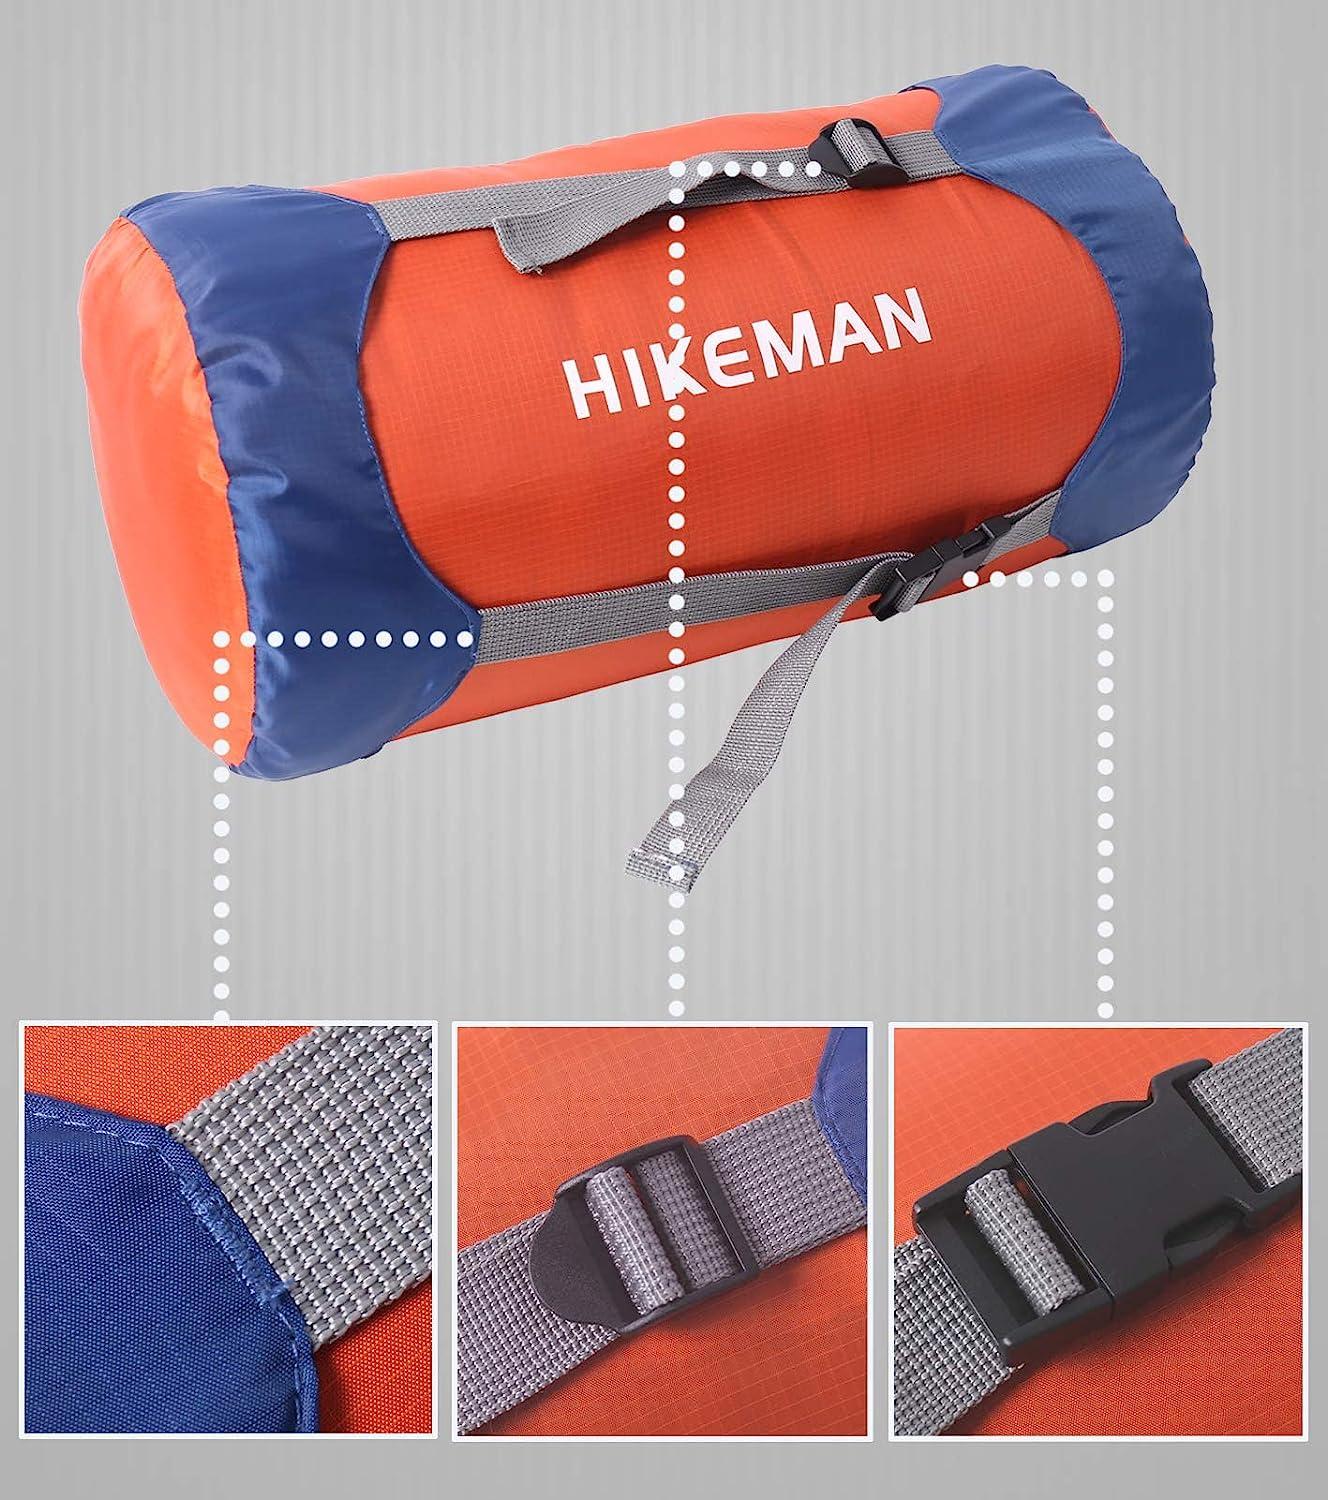 Hikeman Compression Stuff Sack, Compression Sack for Sleeping Bag,  6L/15L/25L/35L Water-Resistant & Ultralight & Compact - Space Saving Gear  for Camping, Traveling, and Outdoors Orange X-Large